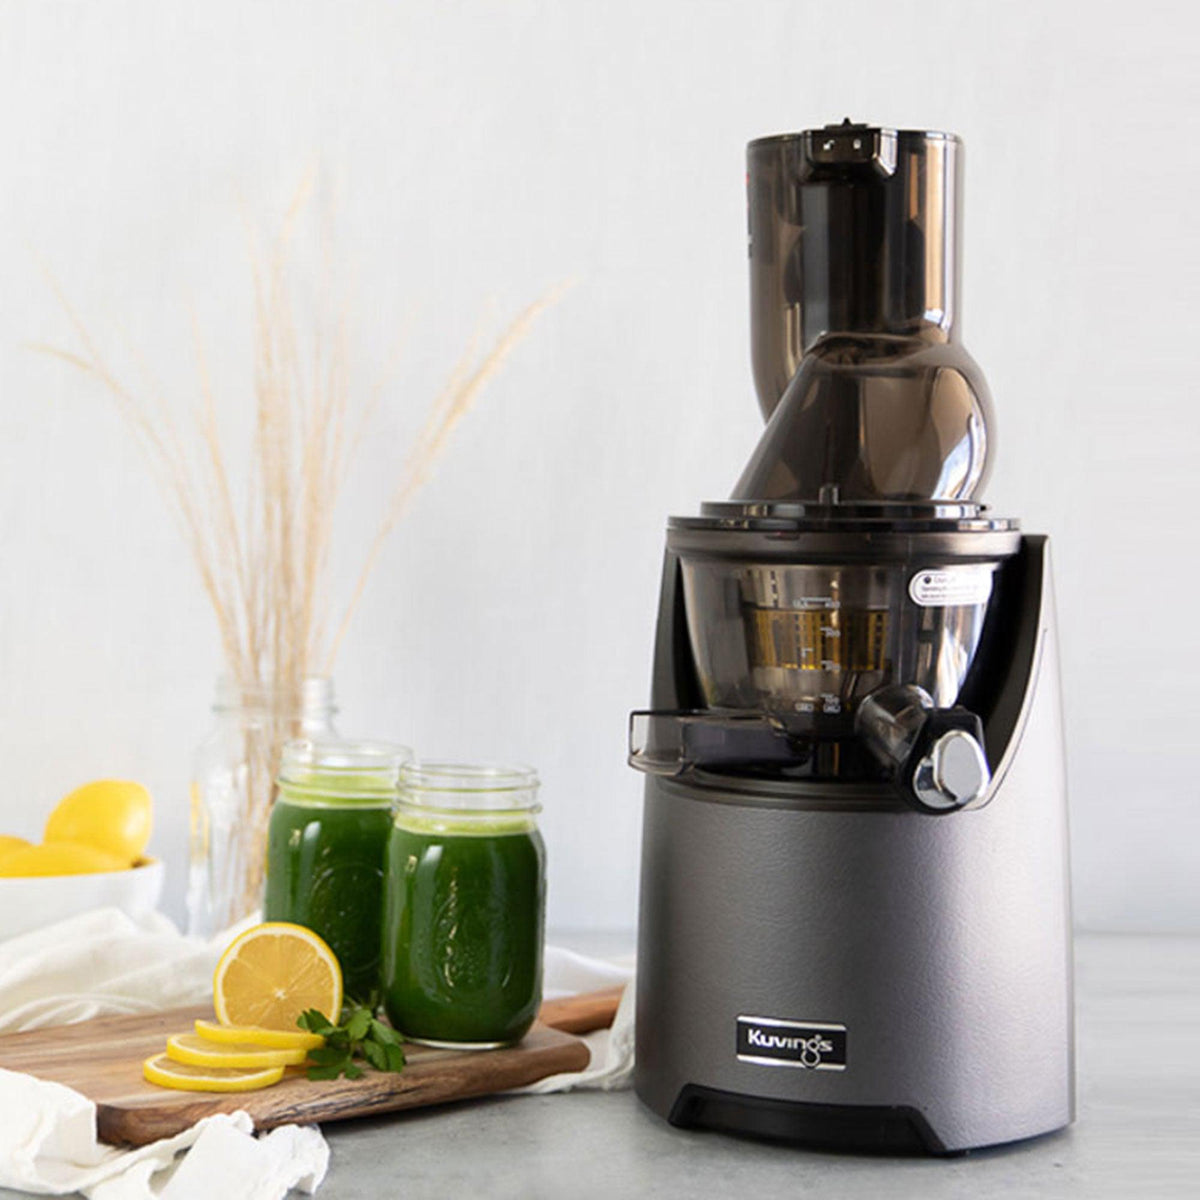 Buying Juice vs. Juicing at Home: Which Saves More Money